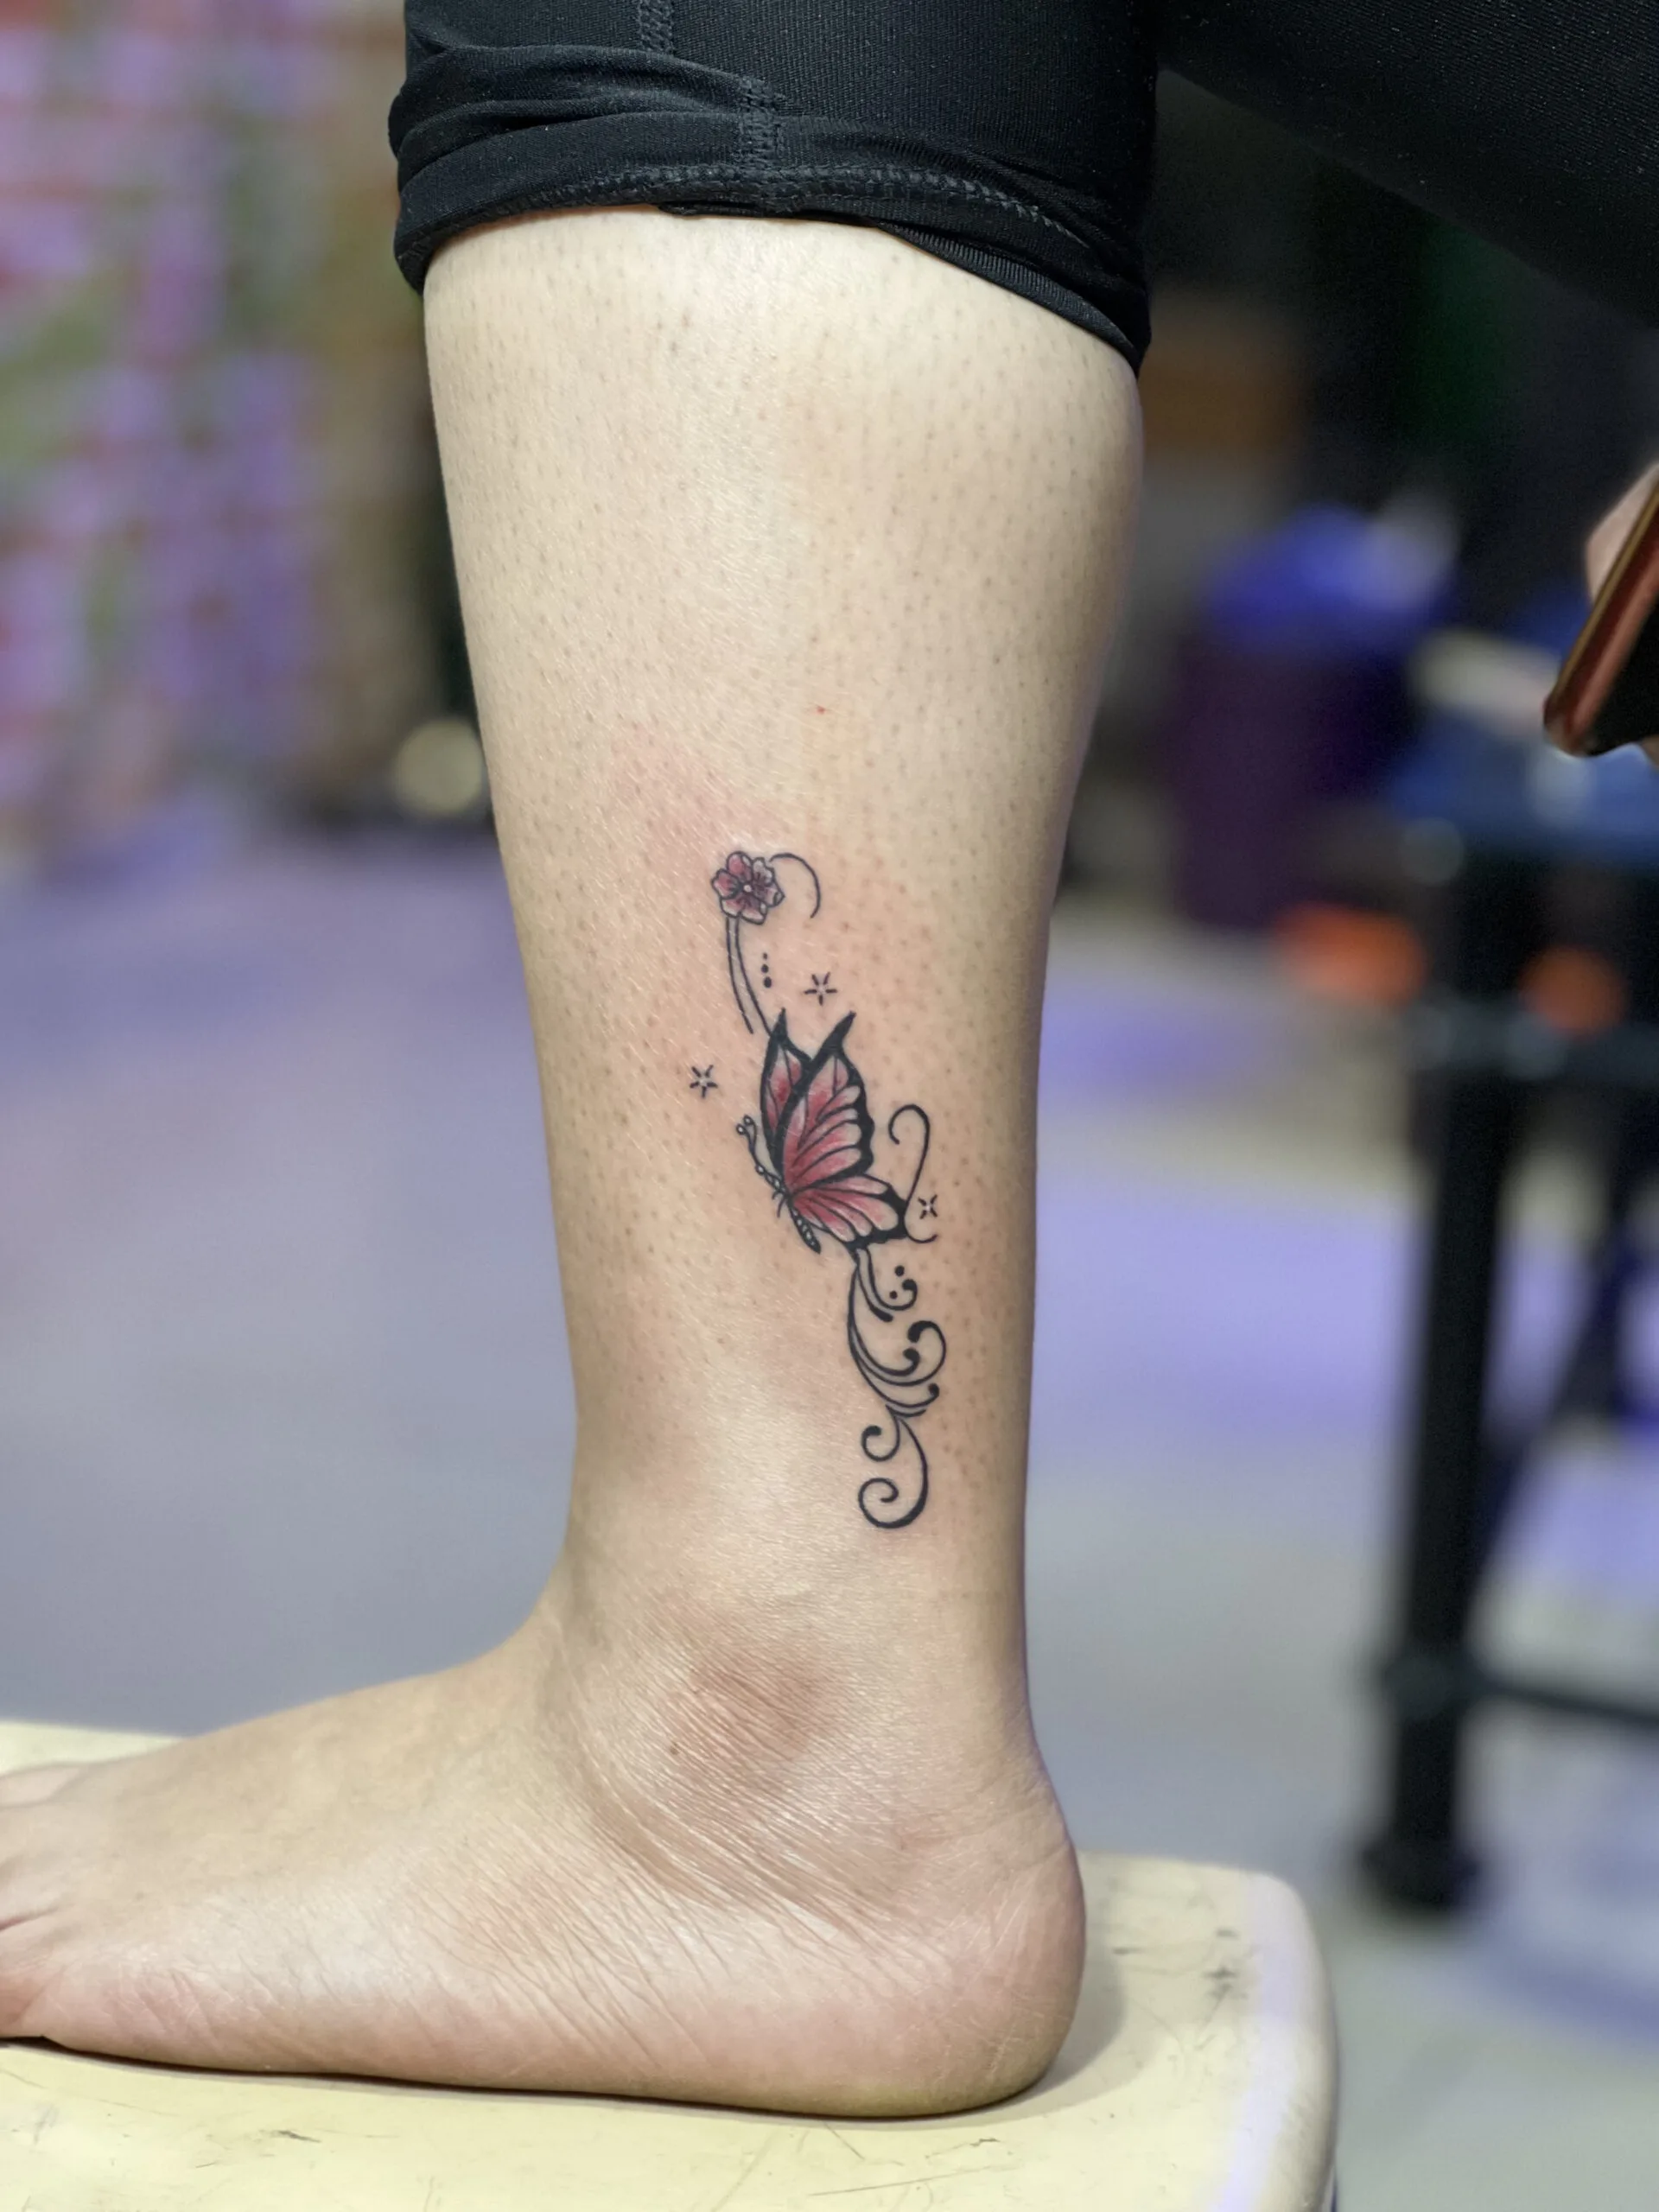 15 Ankle Band Tattoo Ideas And Meanings You'll Fall In Love With |  Preview.ph